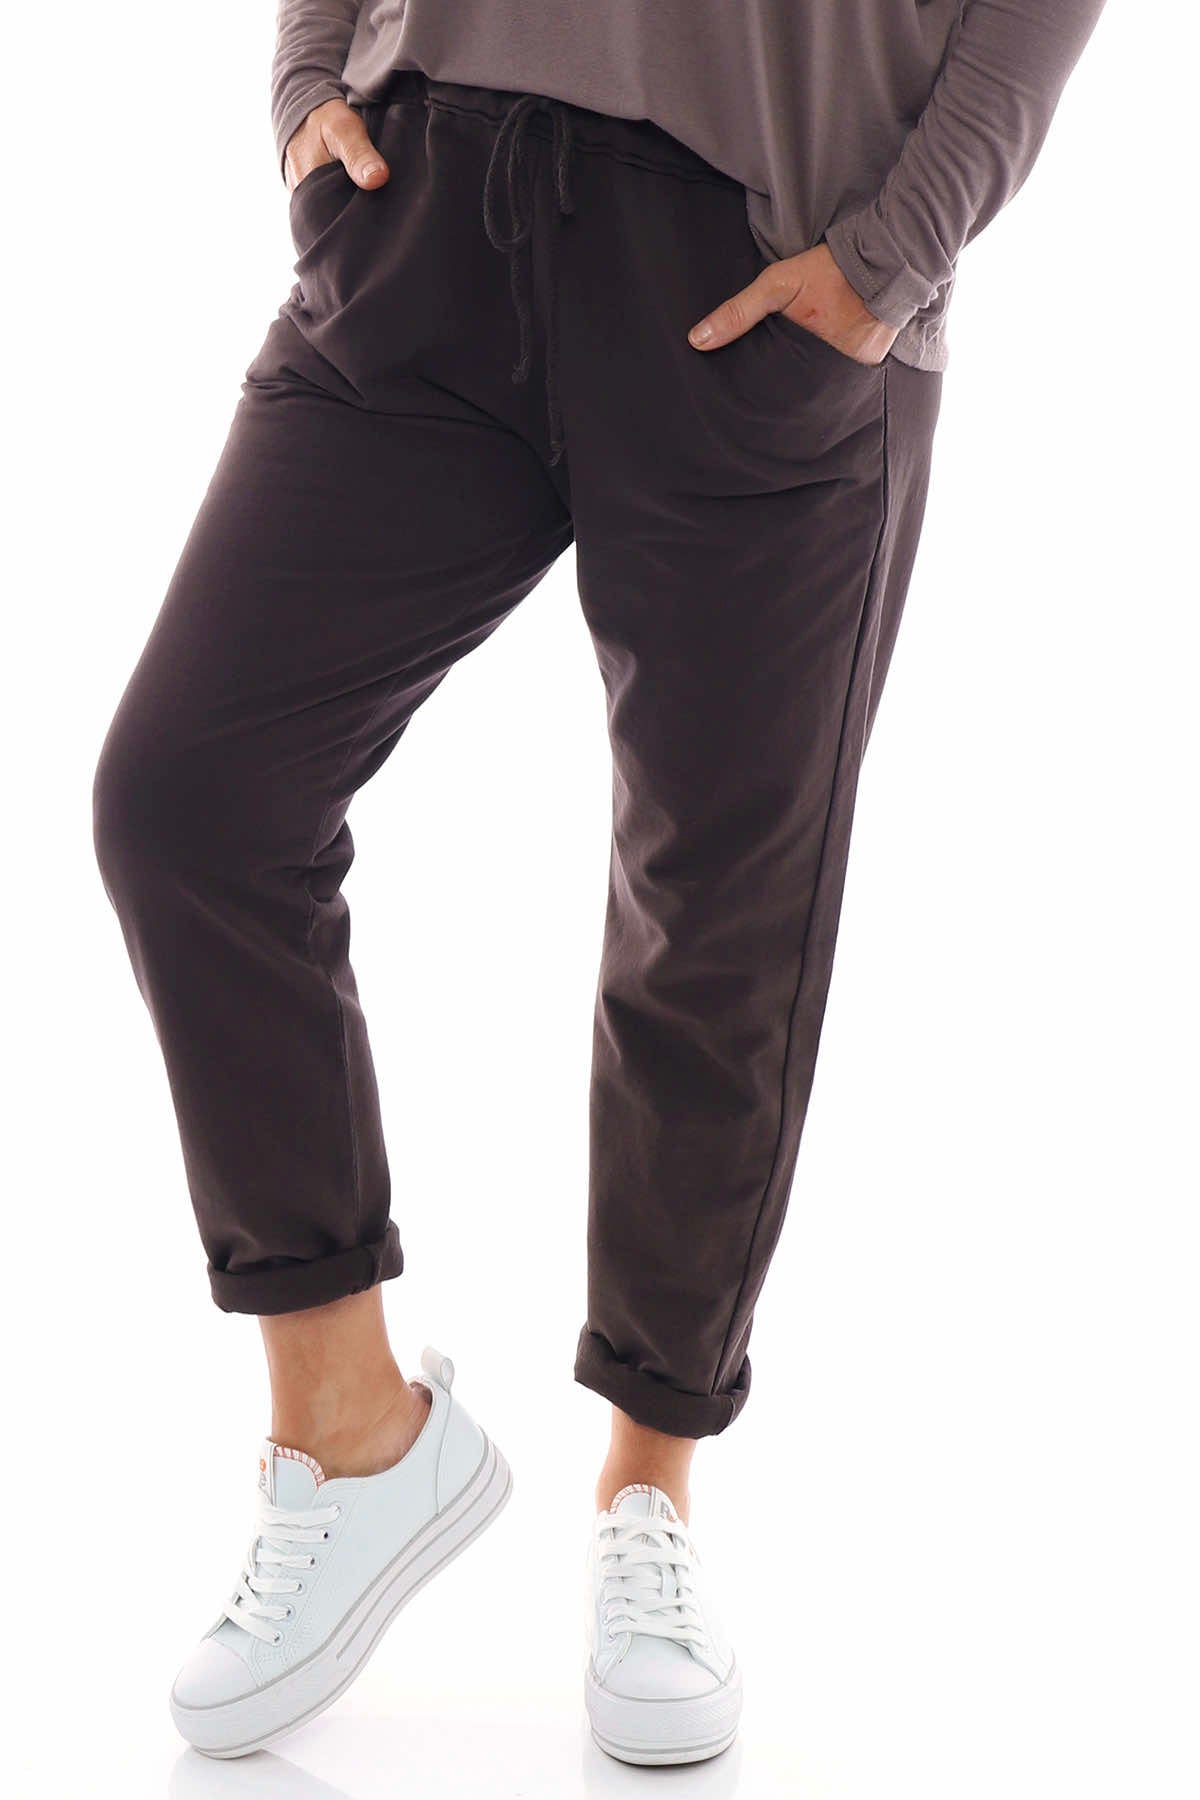 Didcot Jersey Pants Cocoa